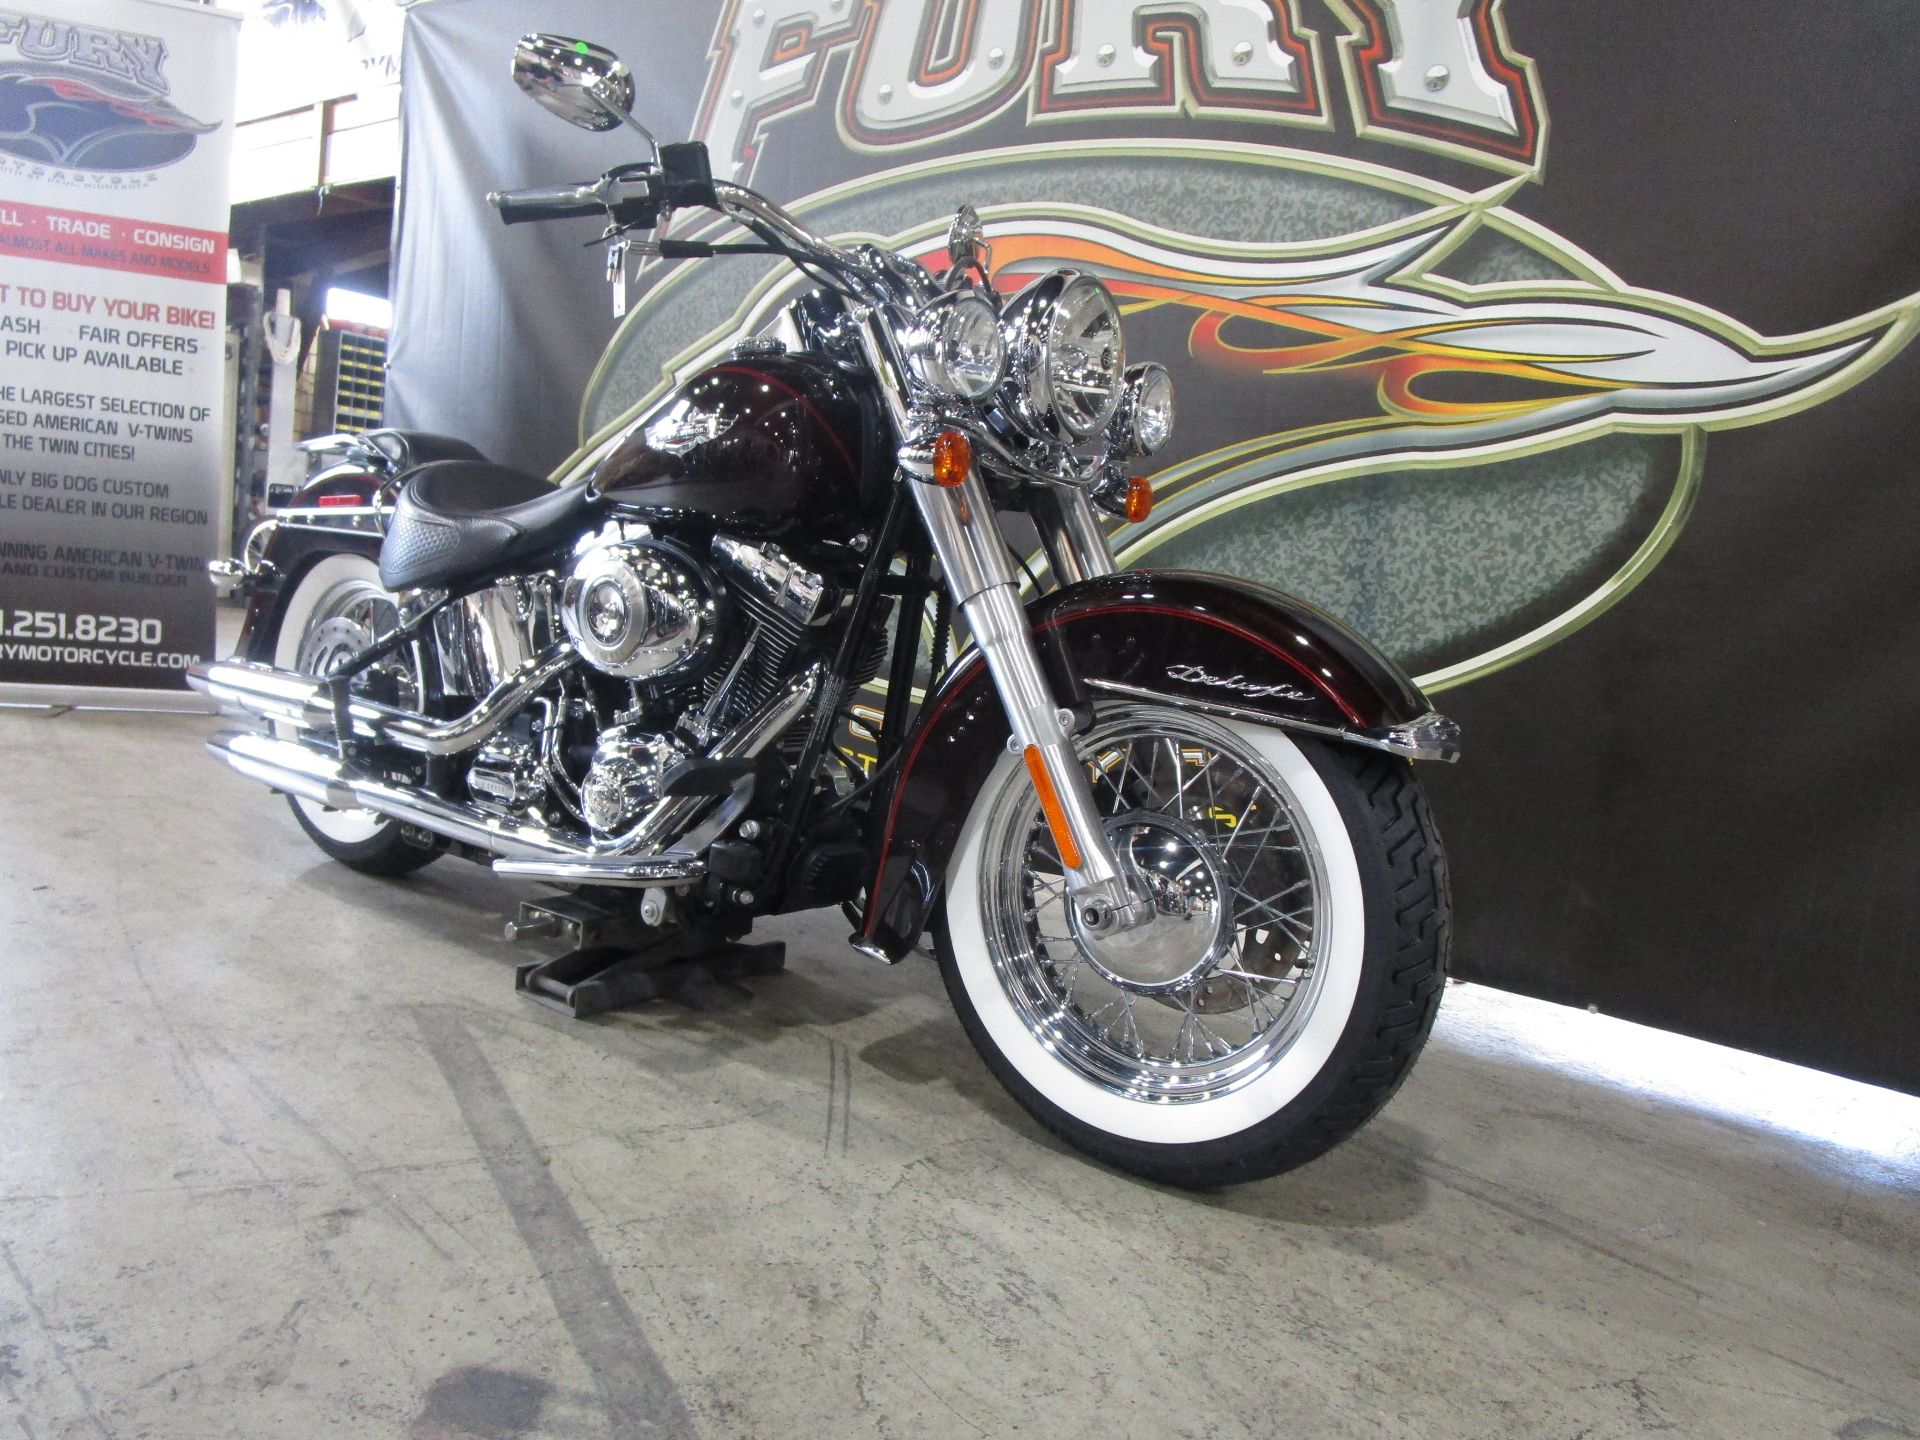 2011 Harley-Davidson Softail® Deluxe in South Saint Paul, Minnesota - Photo 2